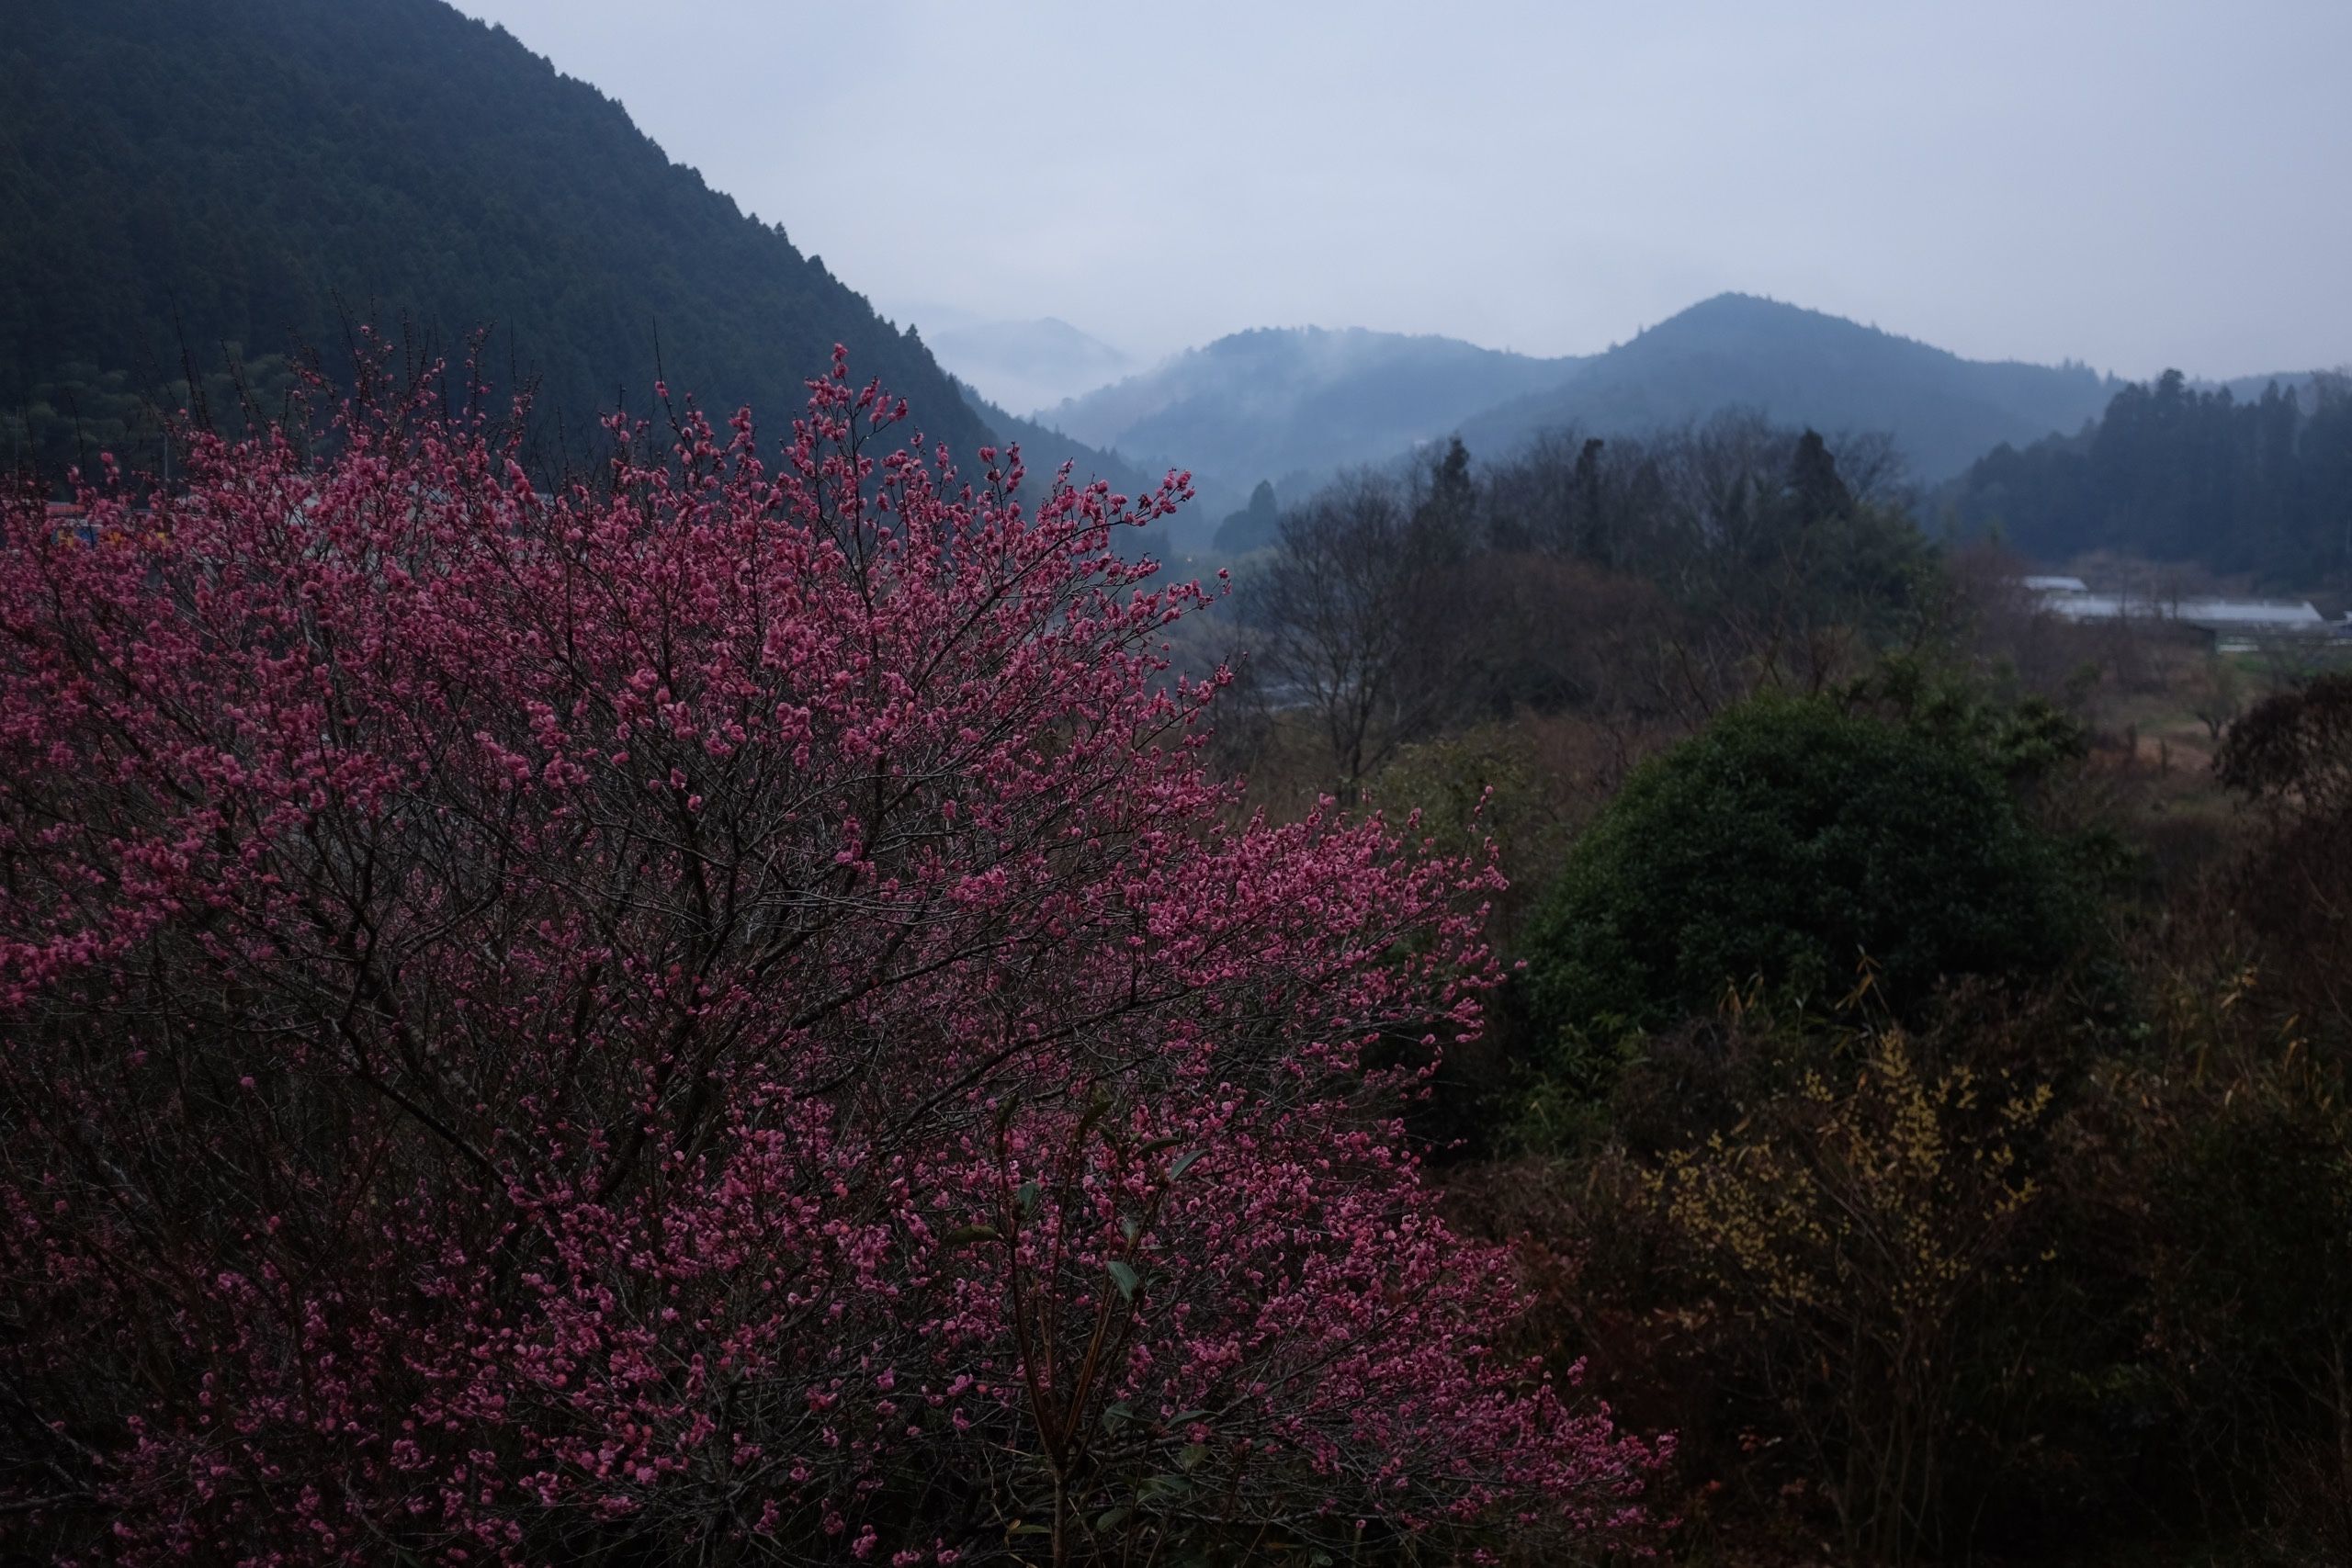 A plum tree in full pink bloom in a valley hung with low clouds.